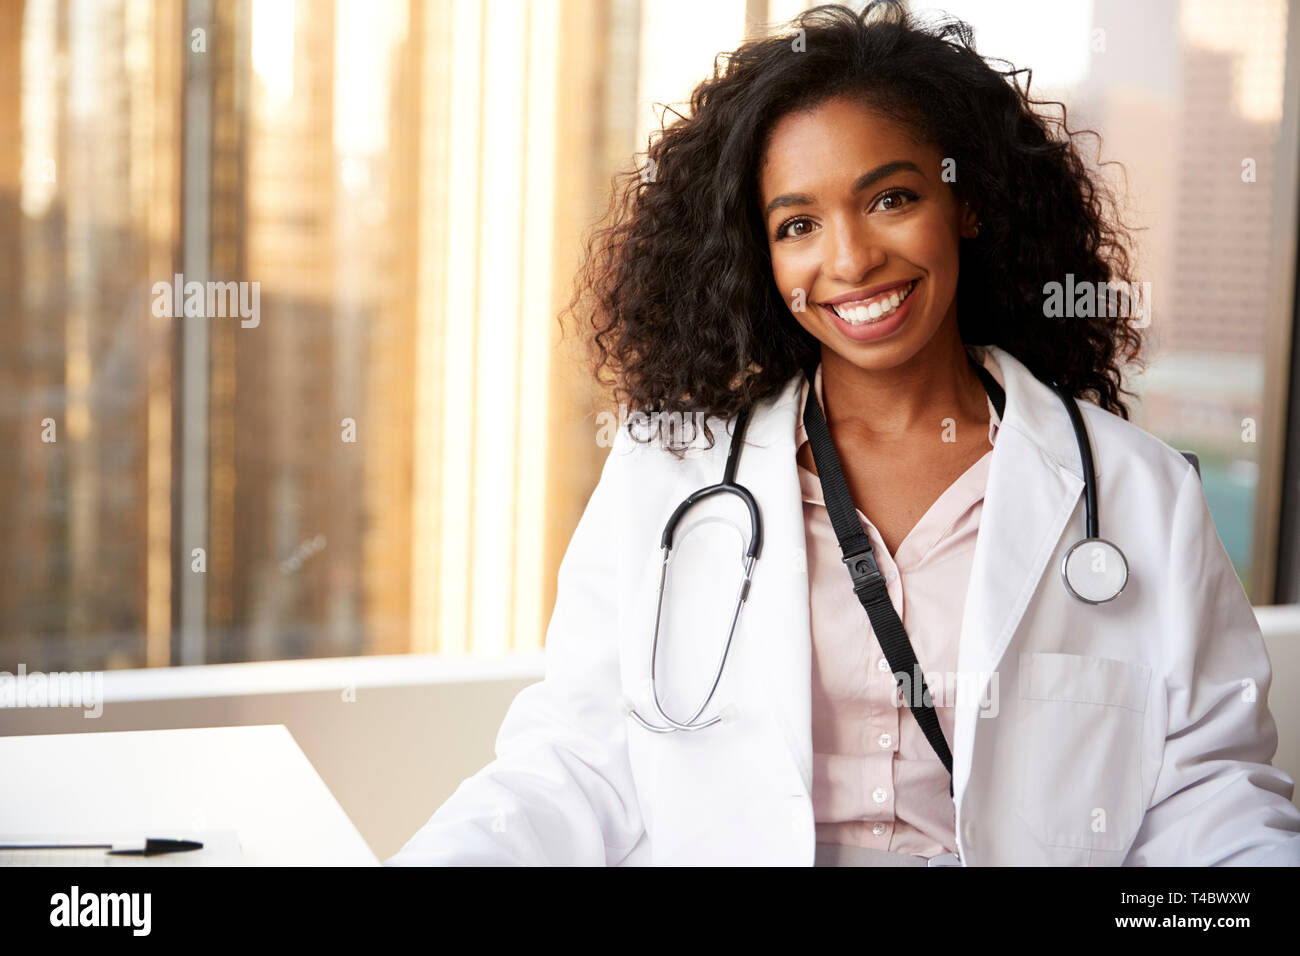 Portrait Of Smiling Female Doctor Wearing White Coat With Stethoscope In Hospital Office Stock Photo